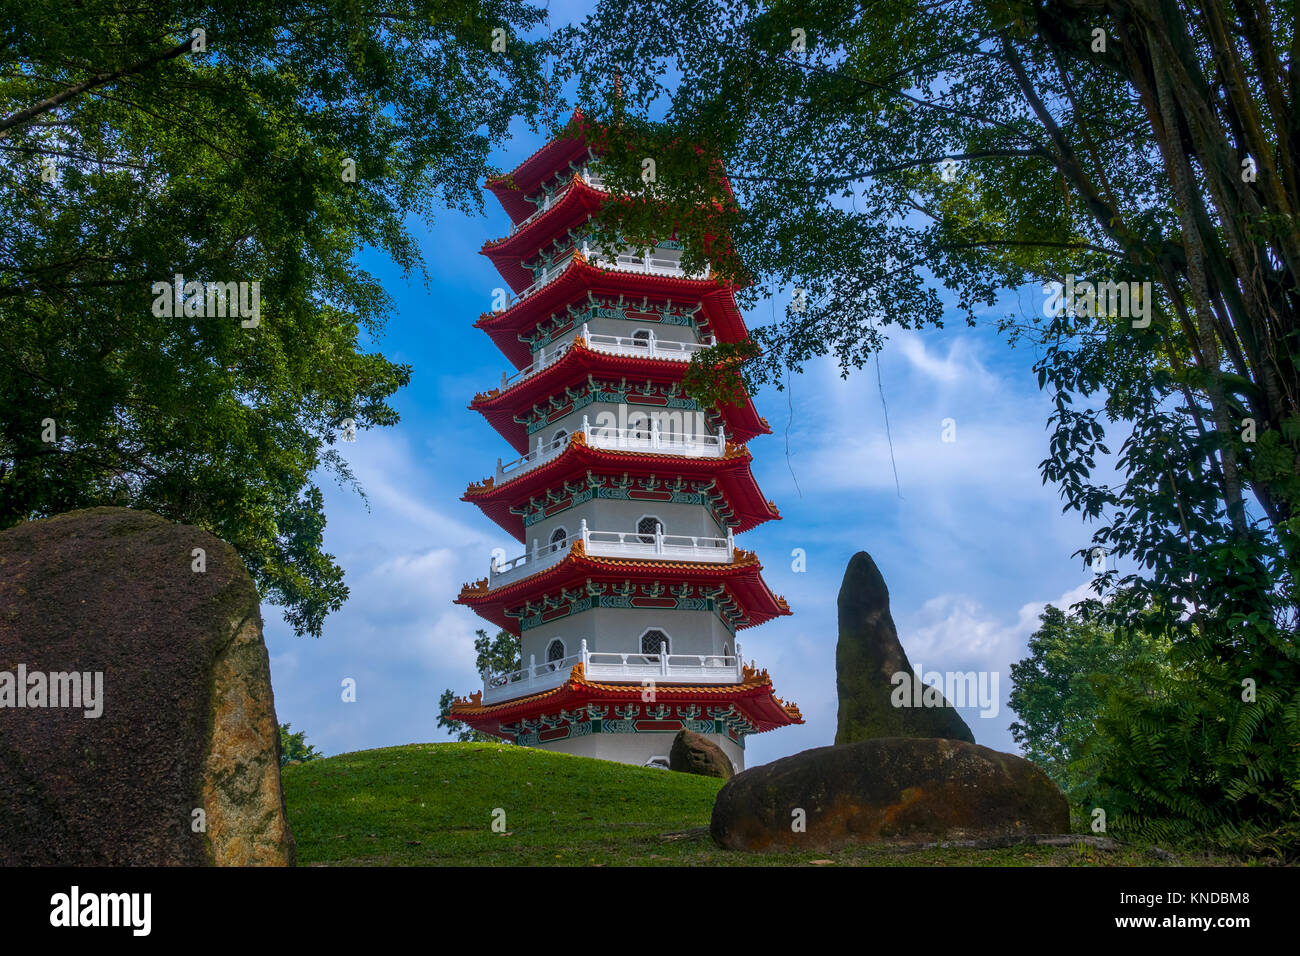 Singapore. Sunny day. Multi-storey pagoda in the park of Singapore surrounded by green trees Stock Photo